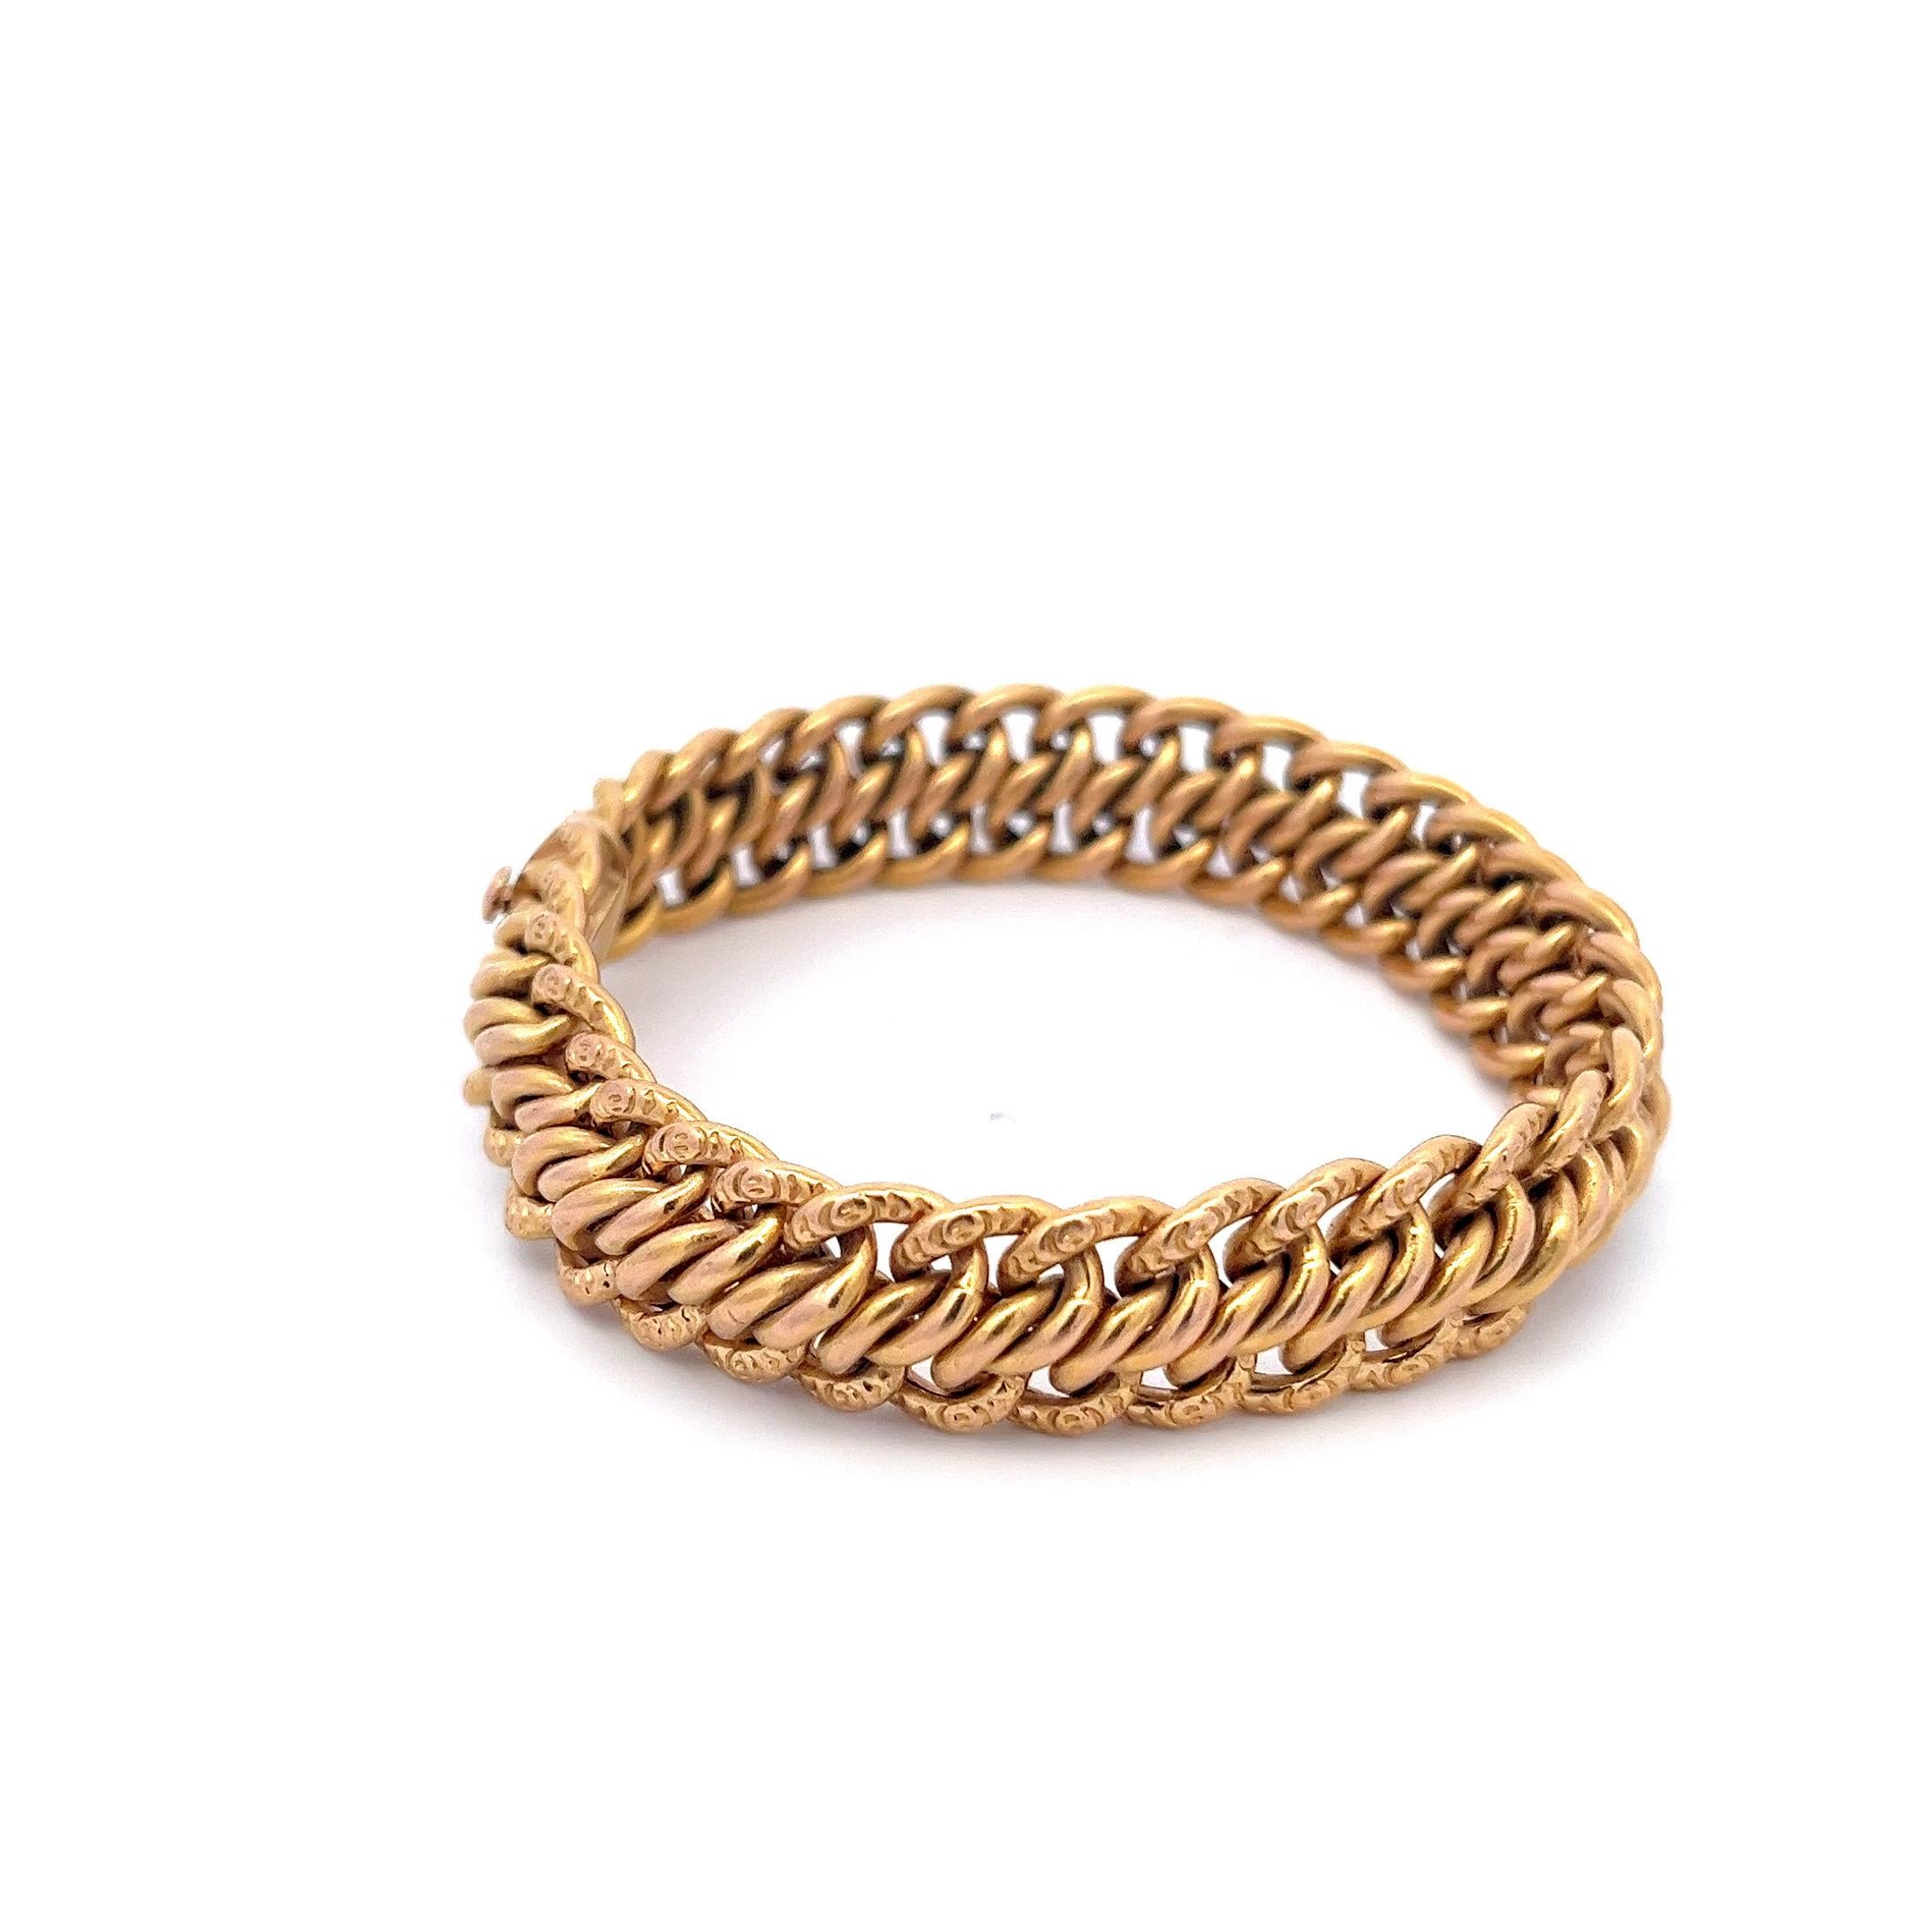 Retro French Curb Link Bracelet Chain in 18 Karat Yellow Gold C. 1950 